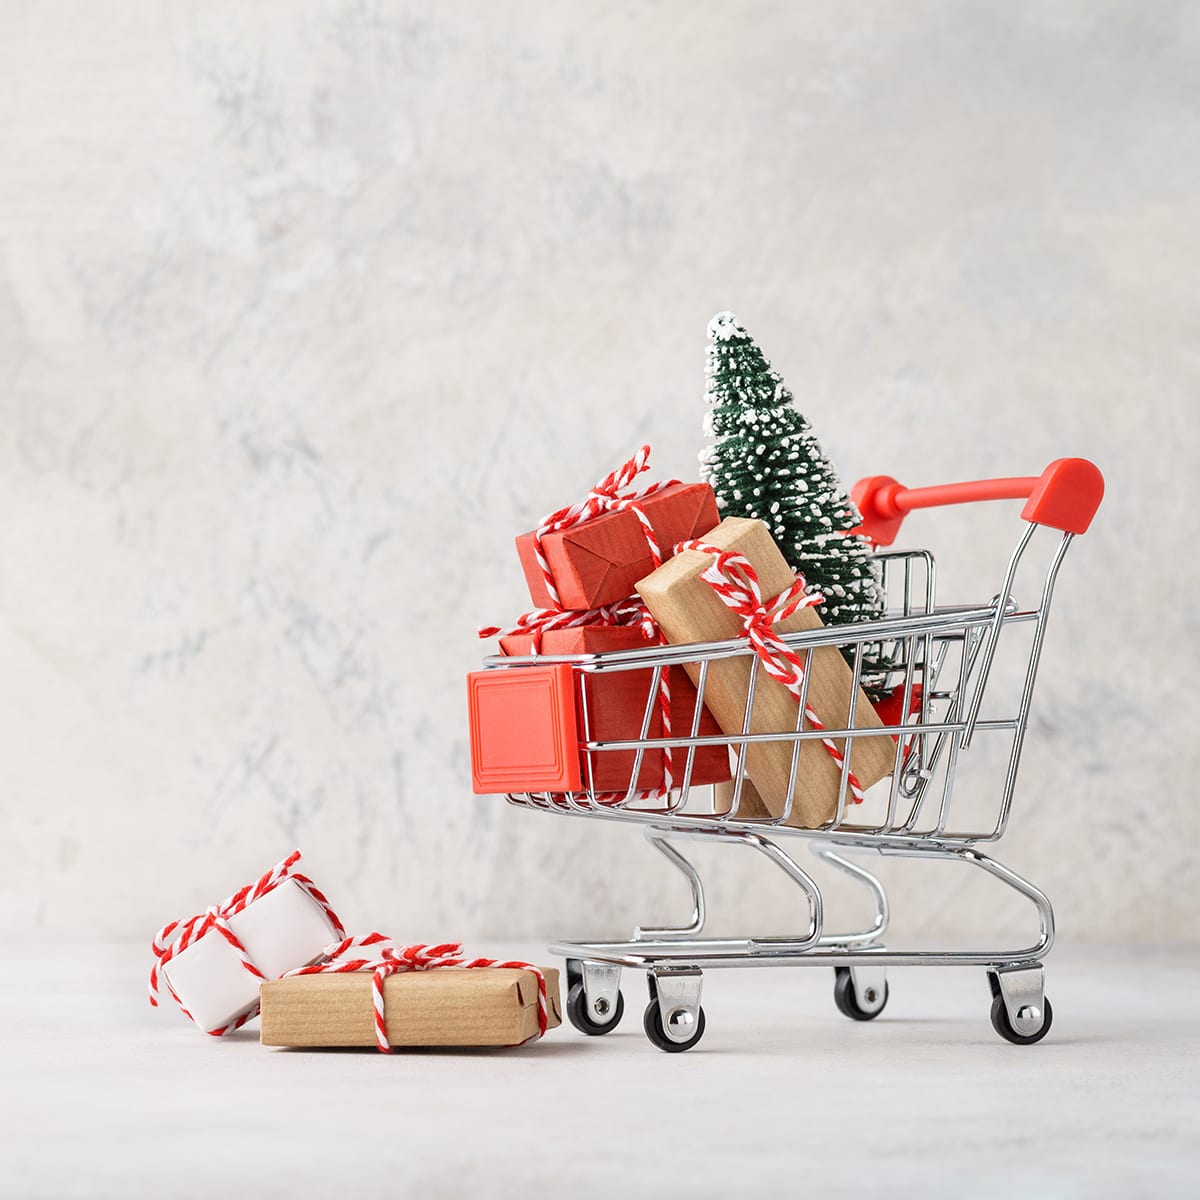 Shopping cart full of various gift boxes and a Christmas tree on light gray background. Christmas sale concept; blog: Gift Guide for Small Business Owners